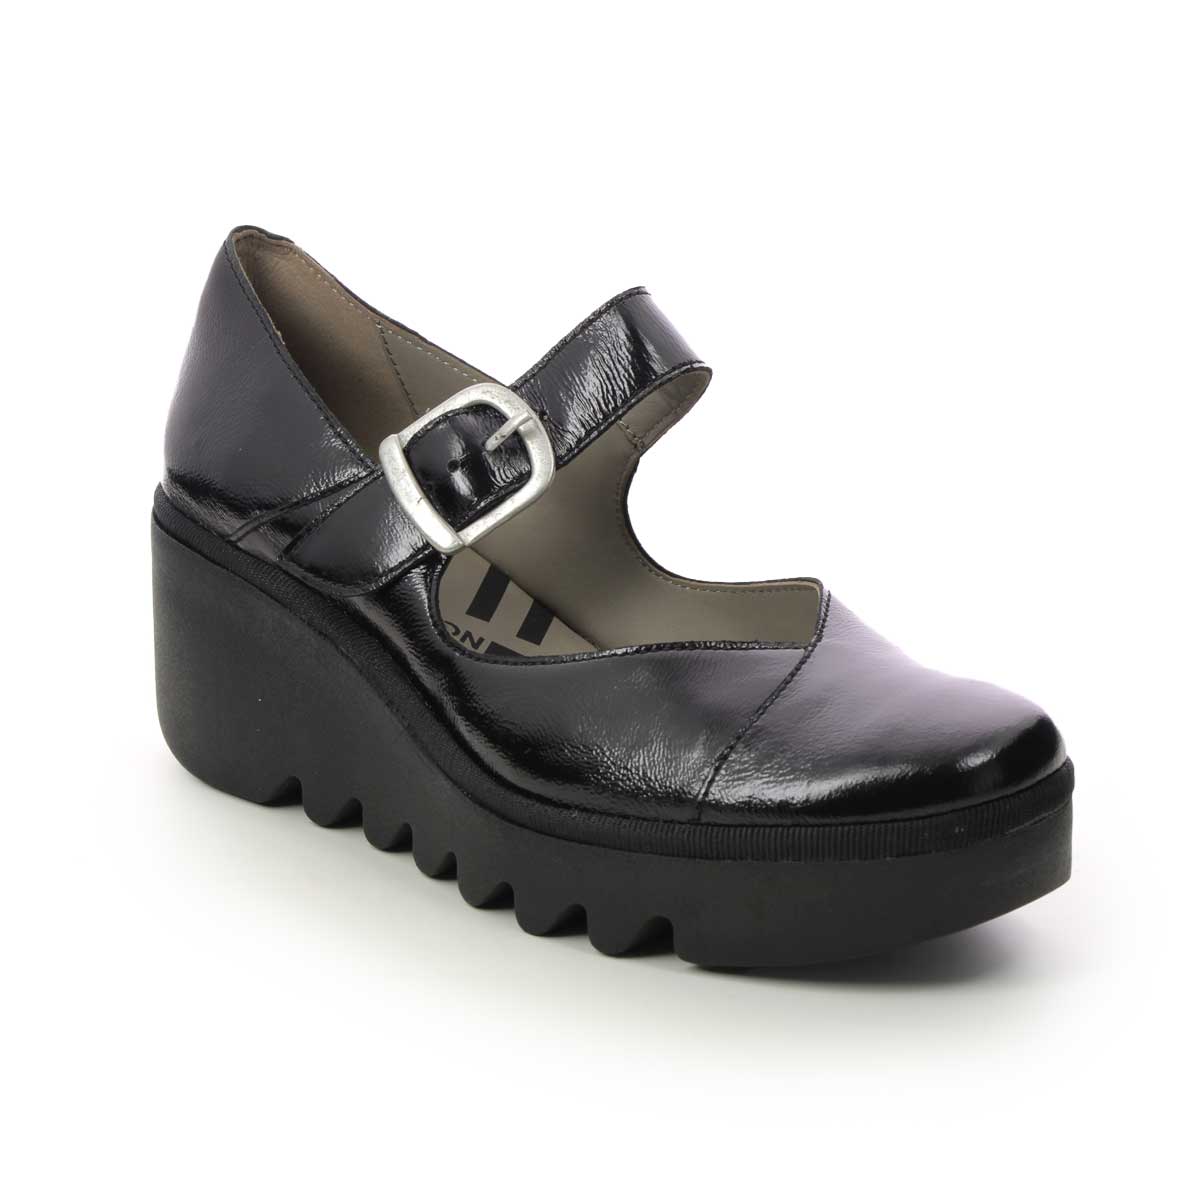 Fly London Baxe   Blu Lmj Black Patent Womens Wedge Shoes P501428 In Size 39 In Plain Black Patent